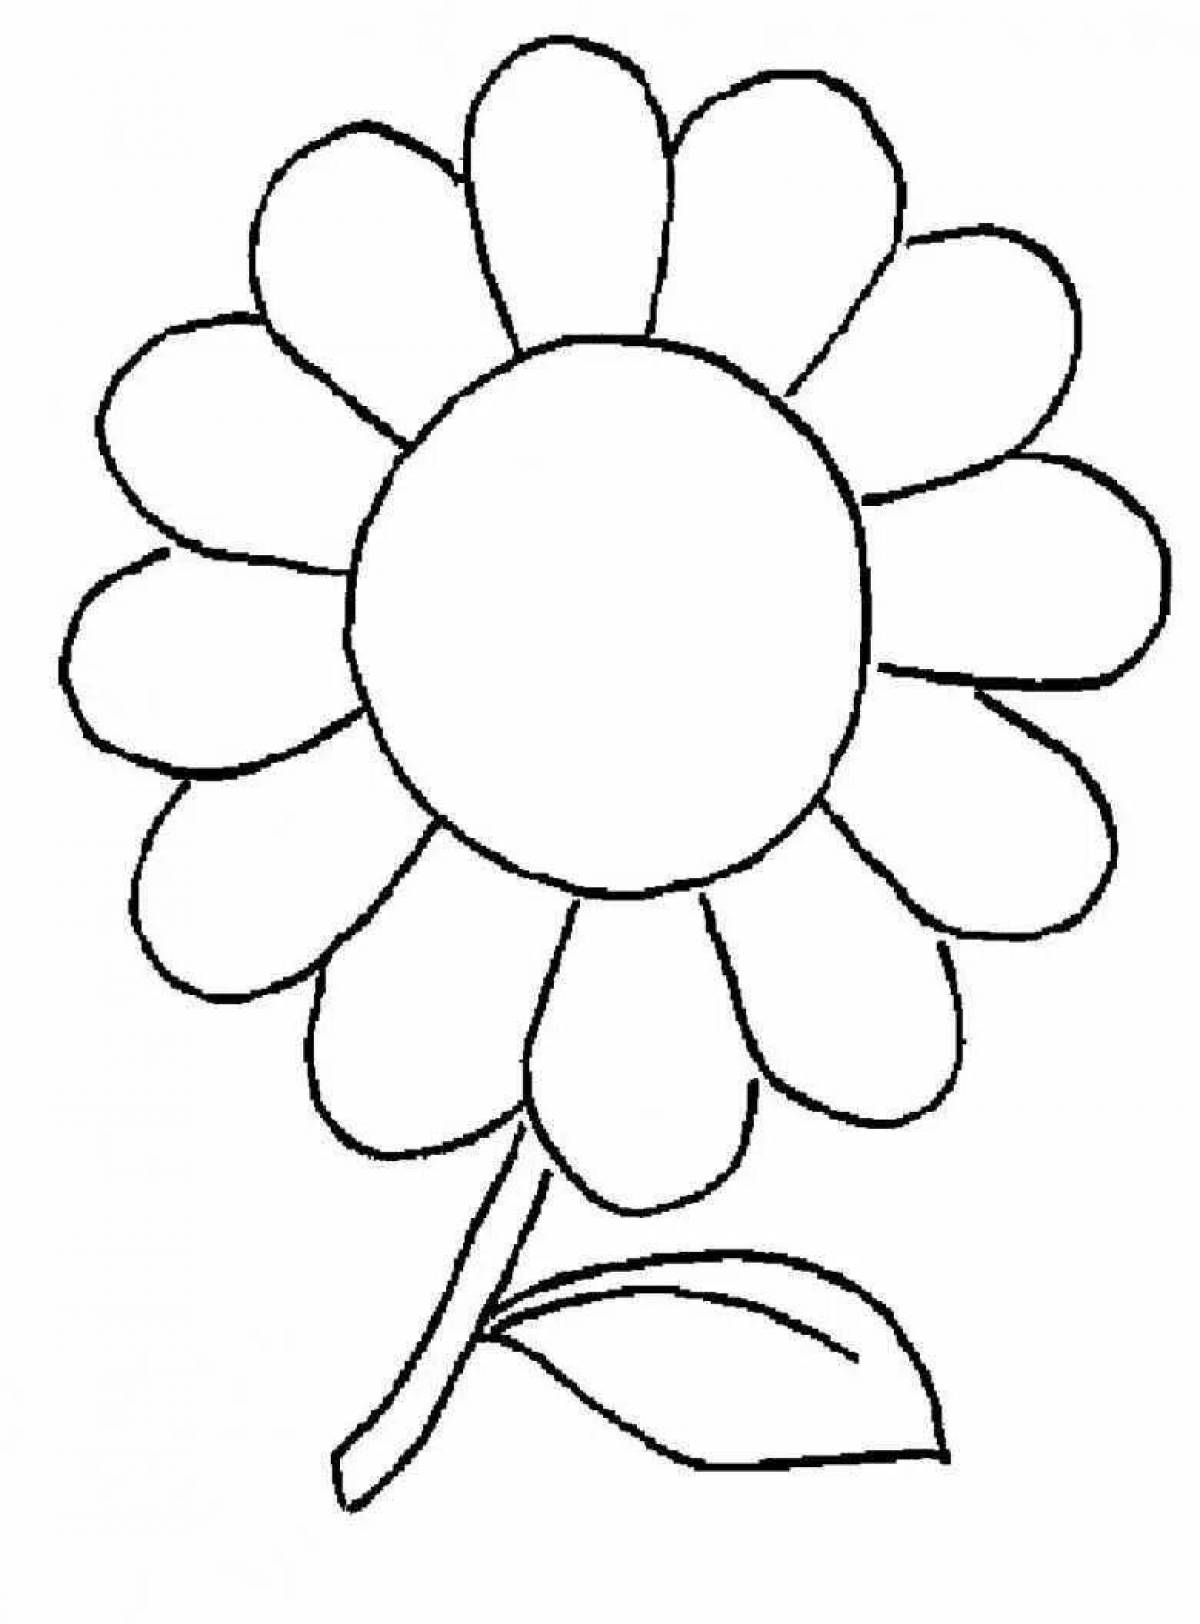 Coloring book exquisite chamomile flowers